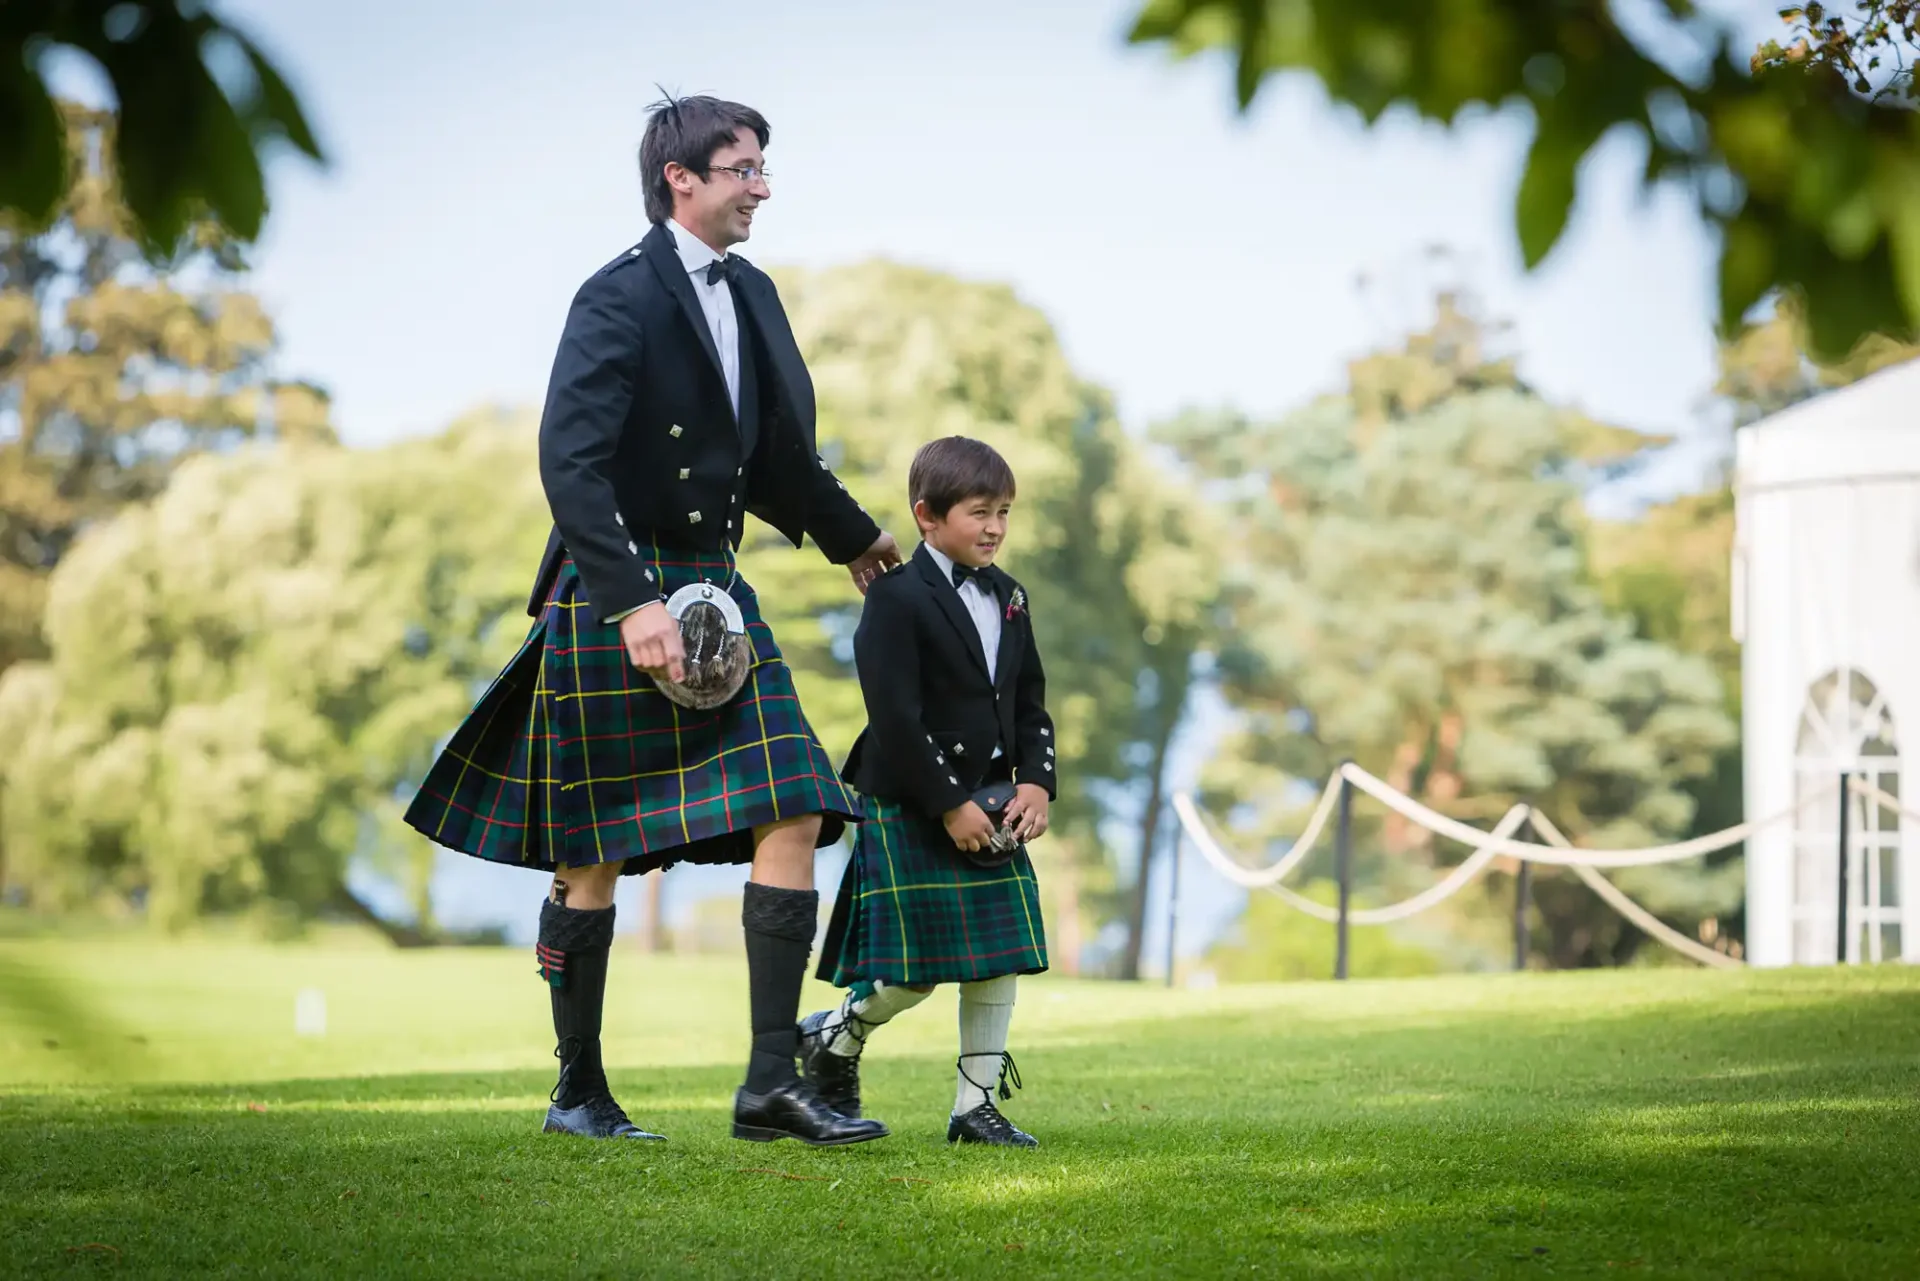 A man and a boy, both wearing traditional tartan kilts and black jackets, walk hand in hand in a sunny park.